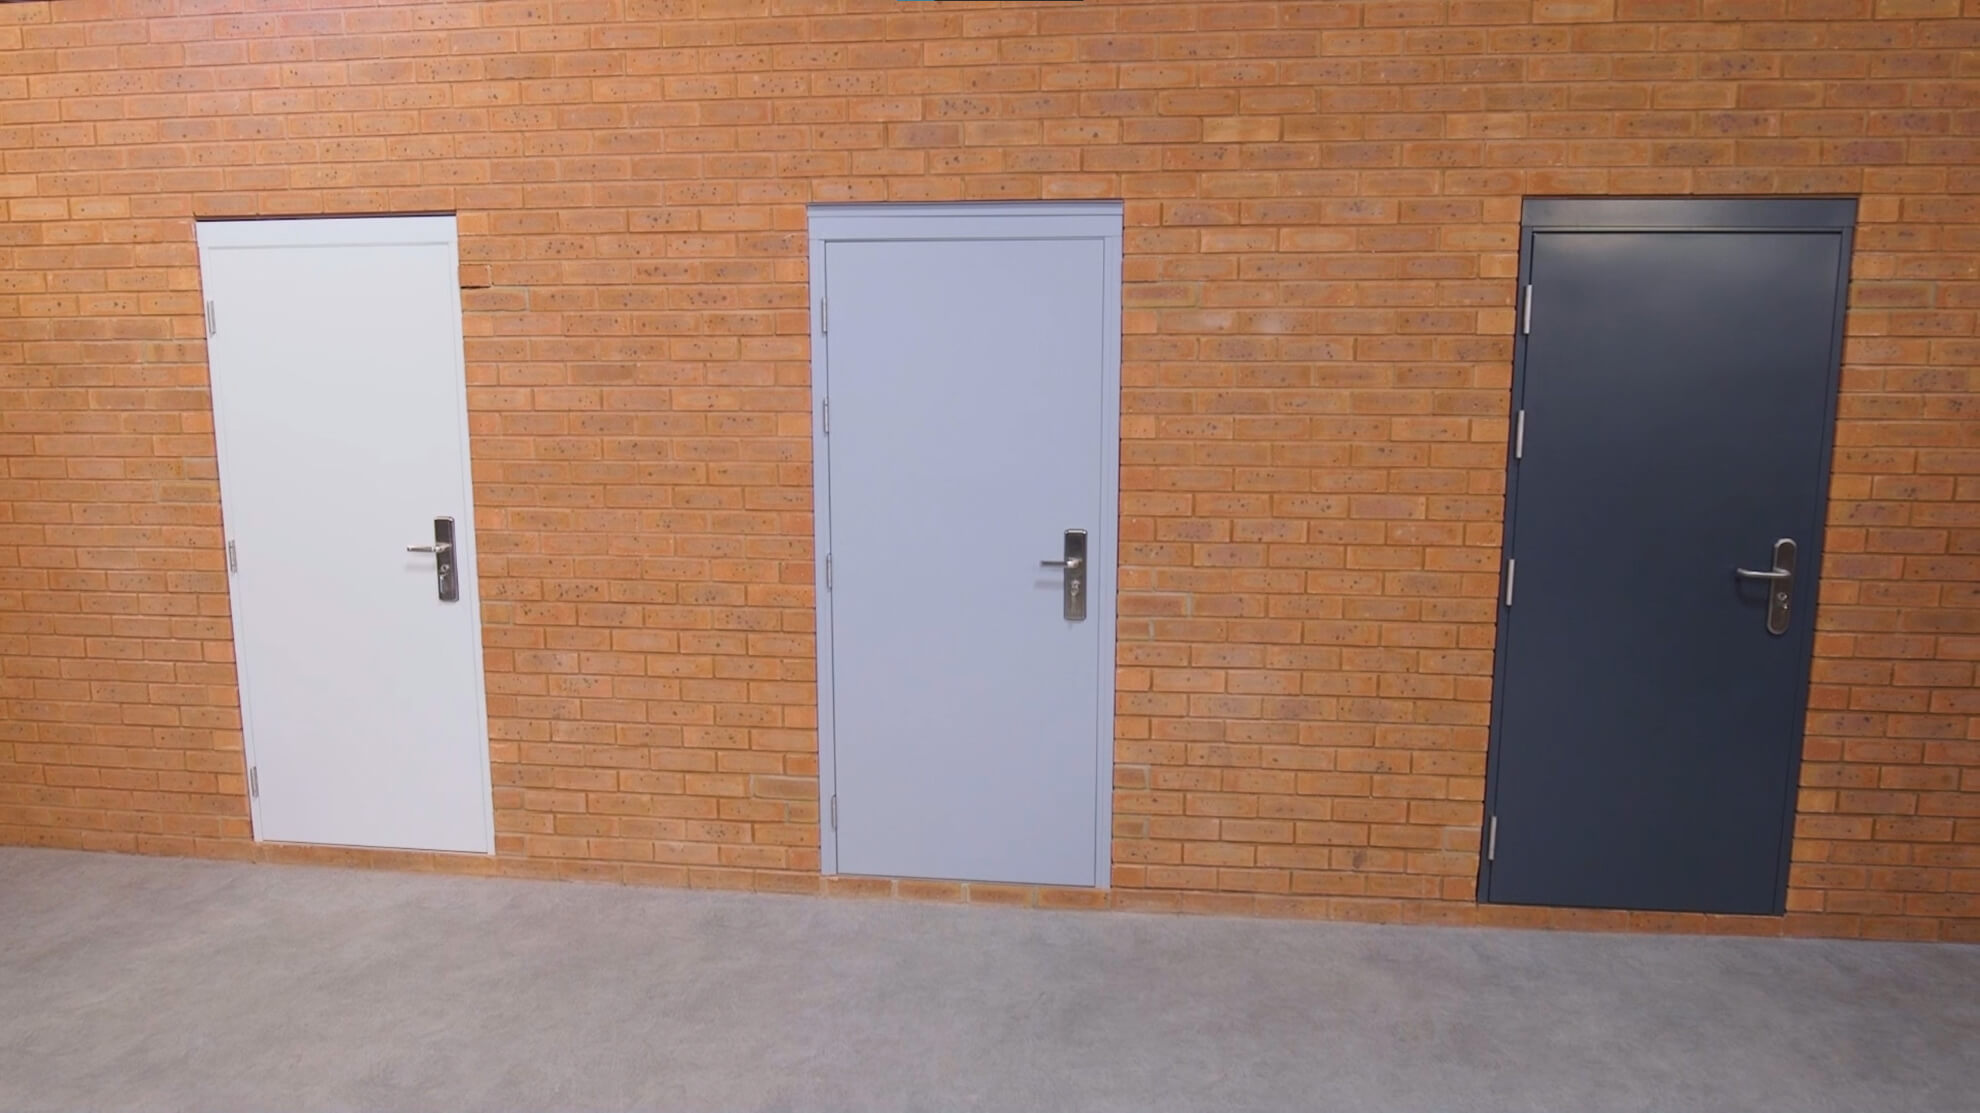 Budget, Security & High Security Steel Doors installed in a brick wall